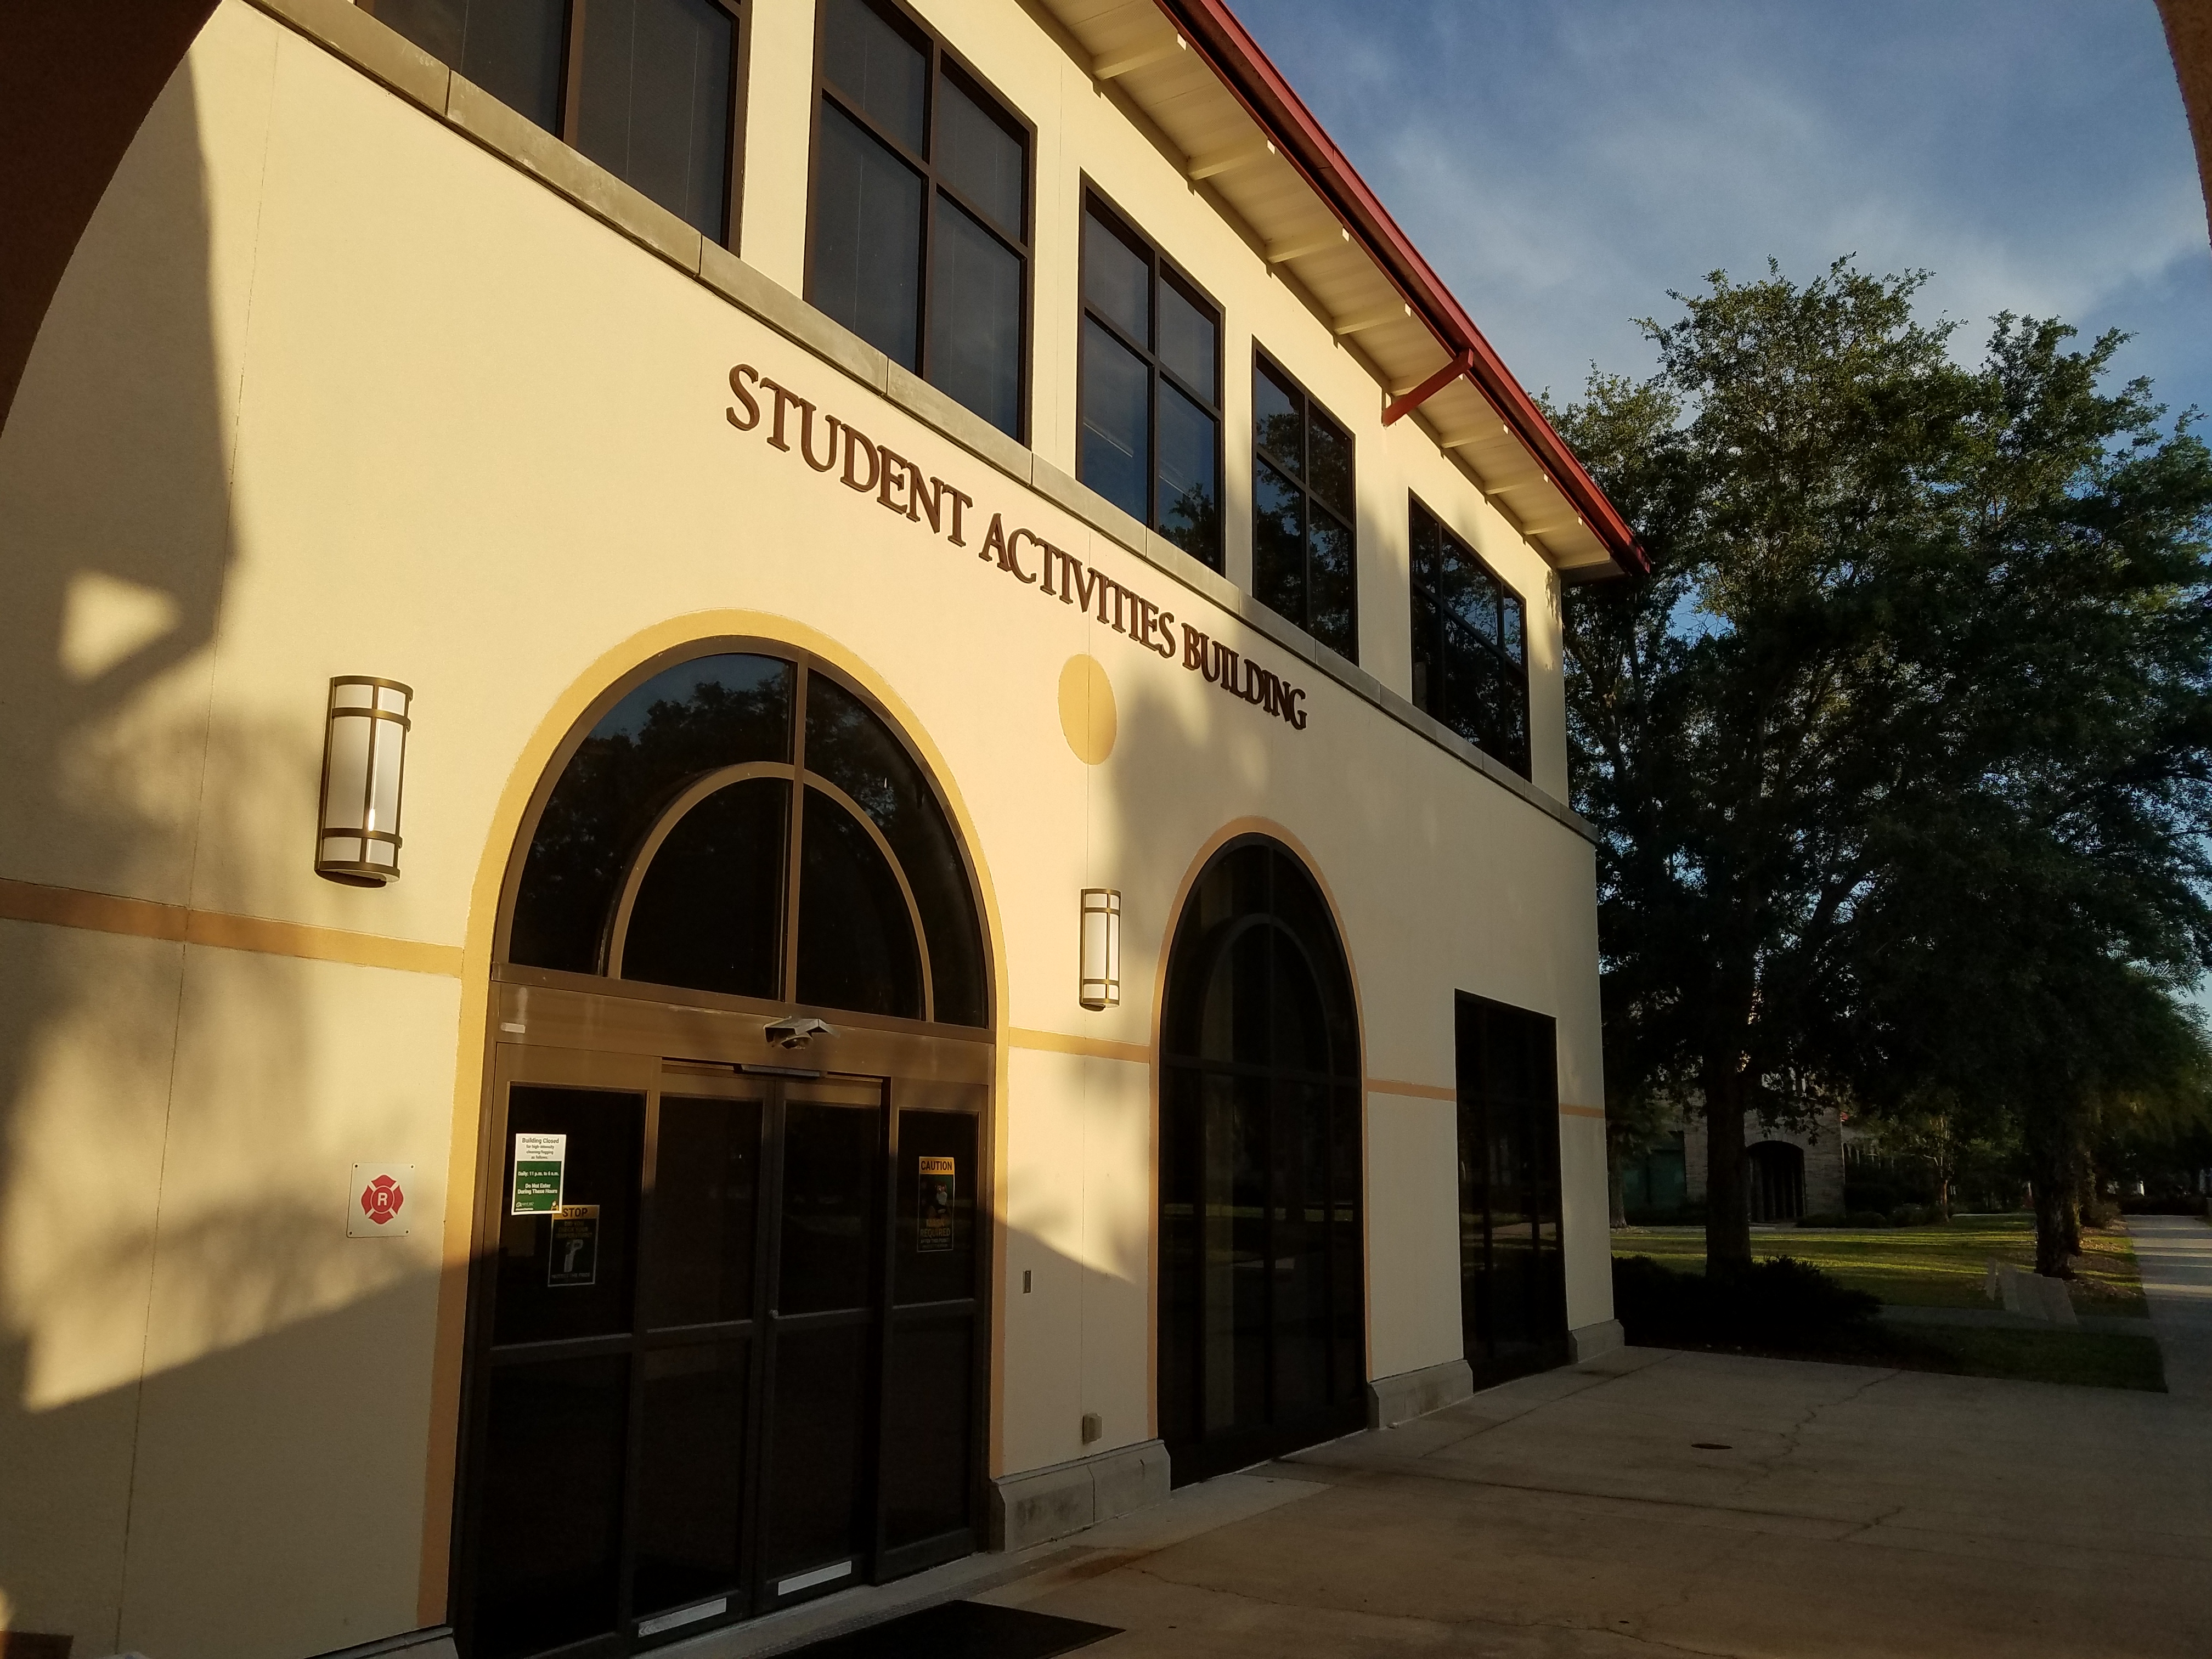 the student activities building